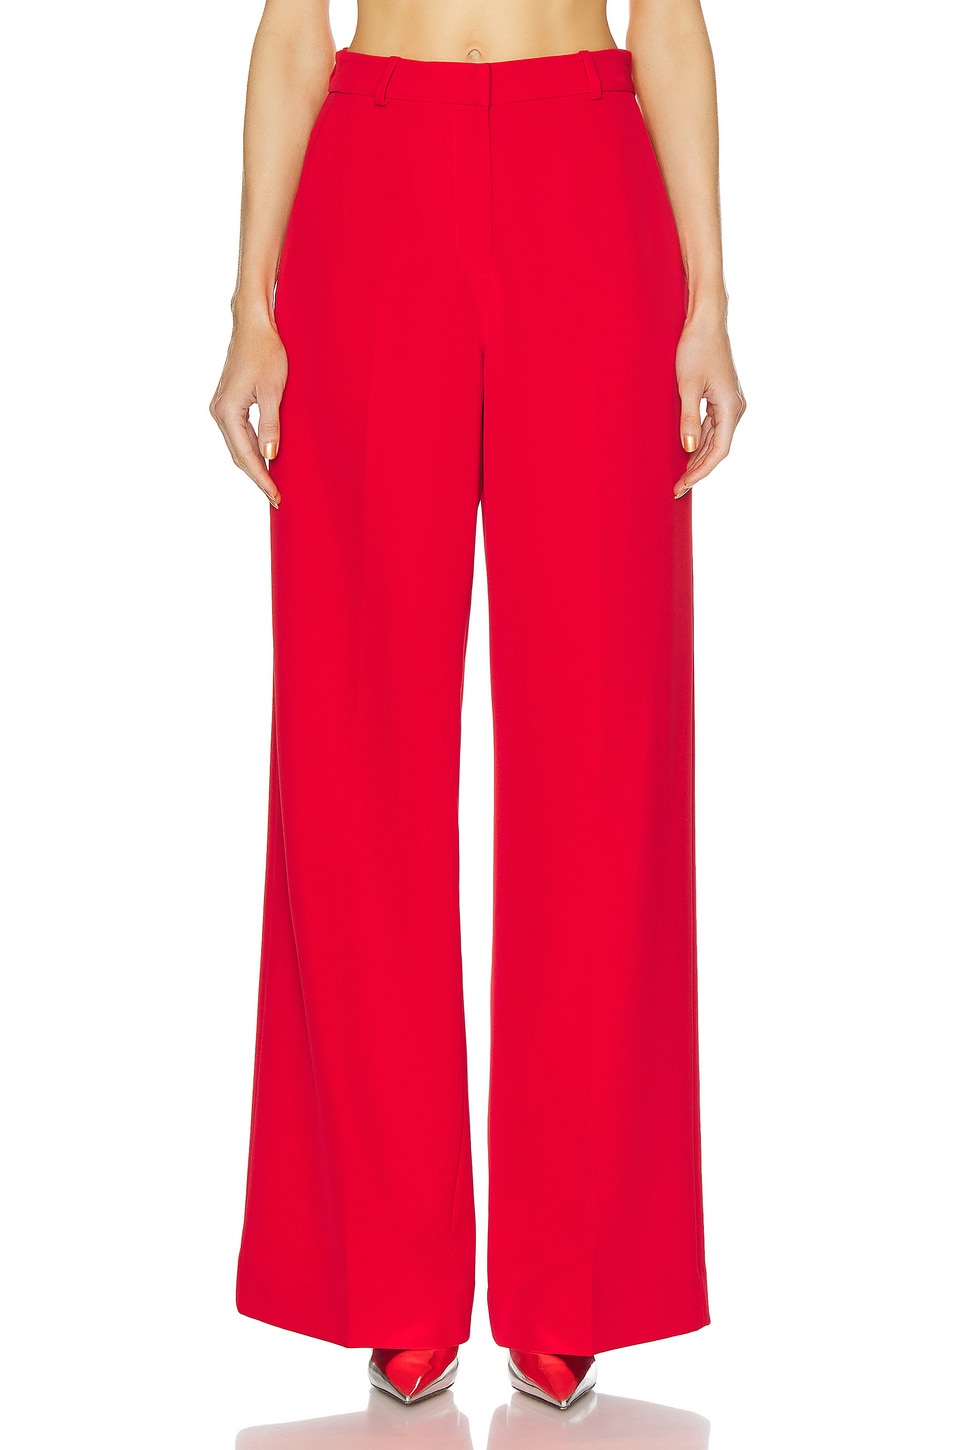 Elin Crepe Elastic Waistband Pant in Red